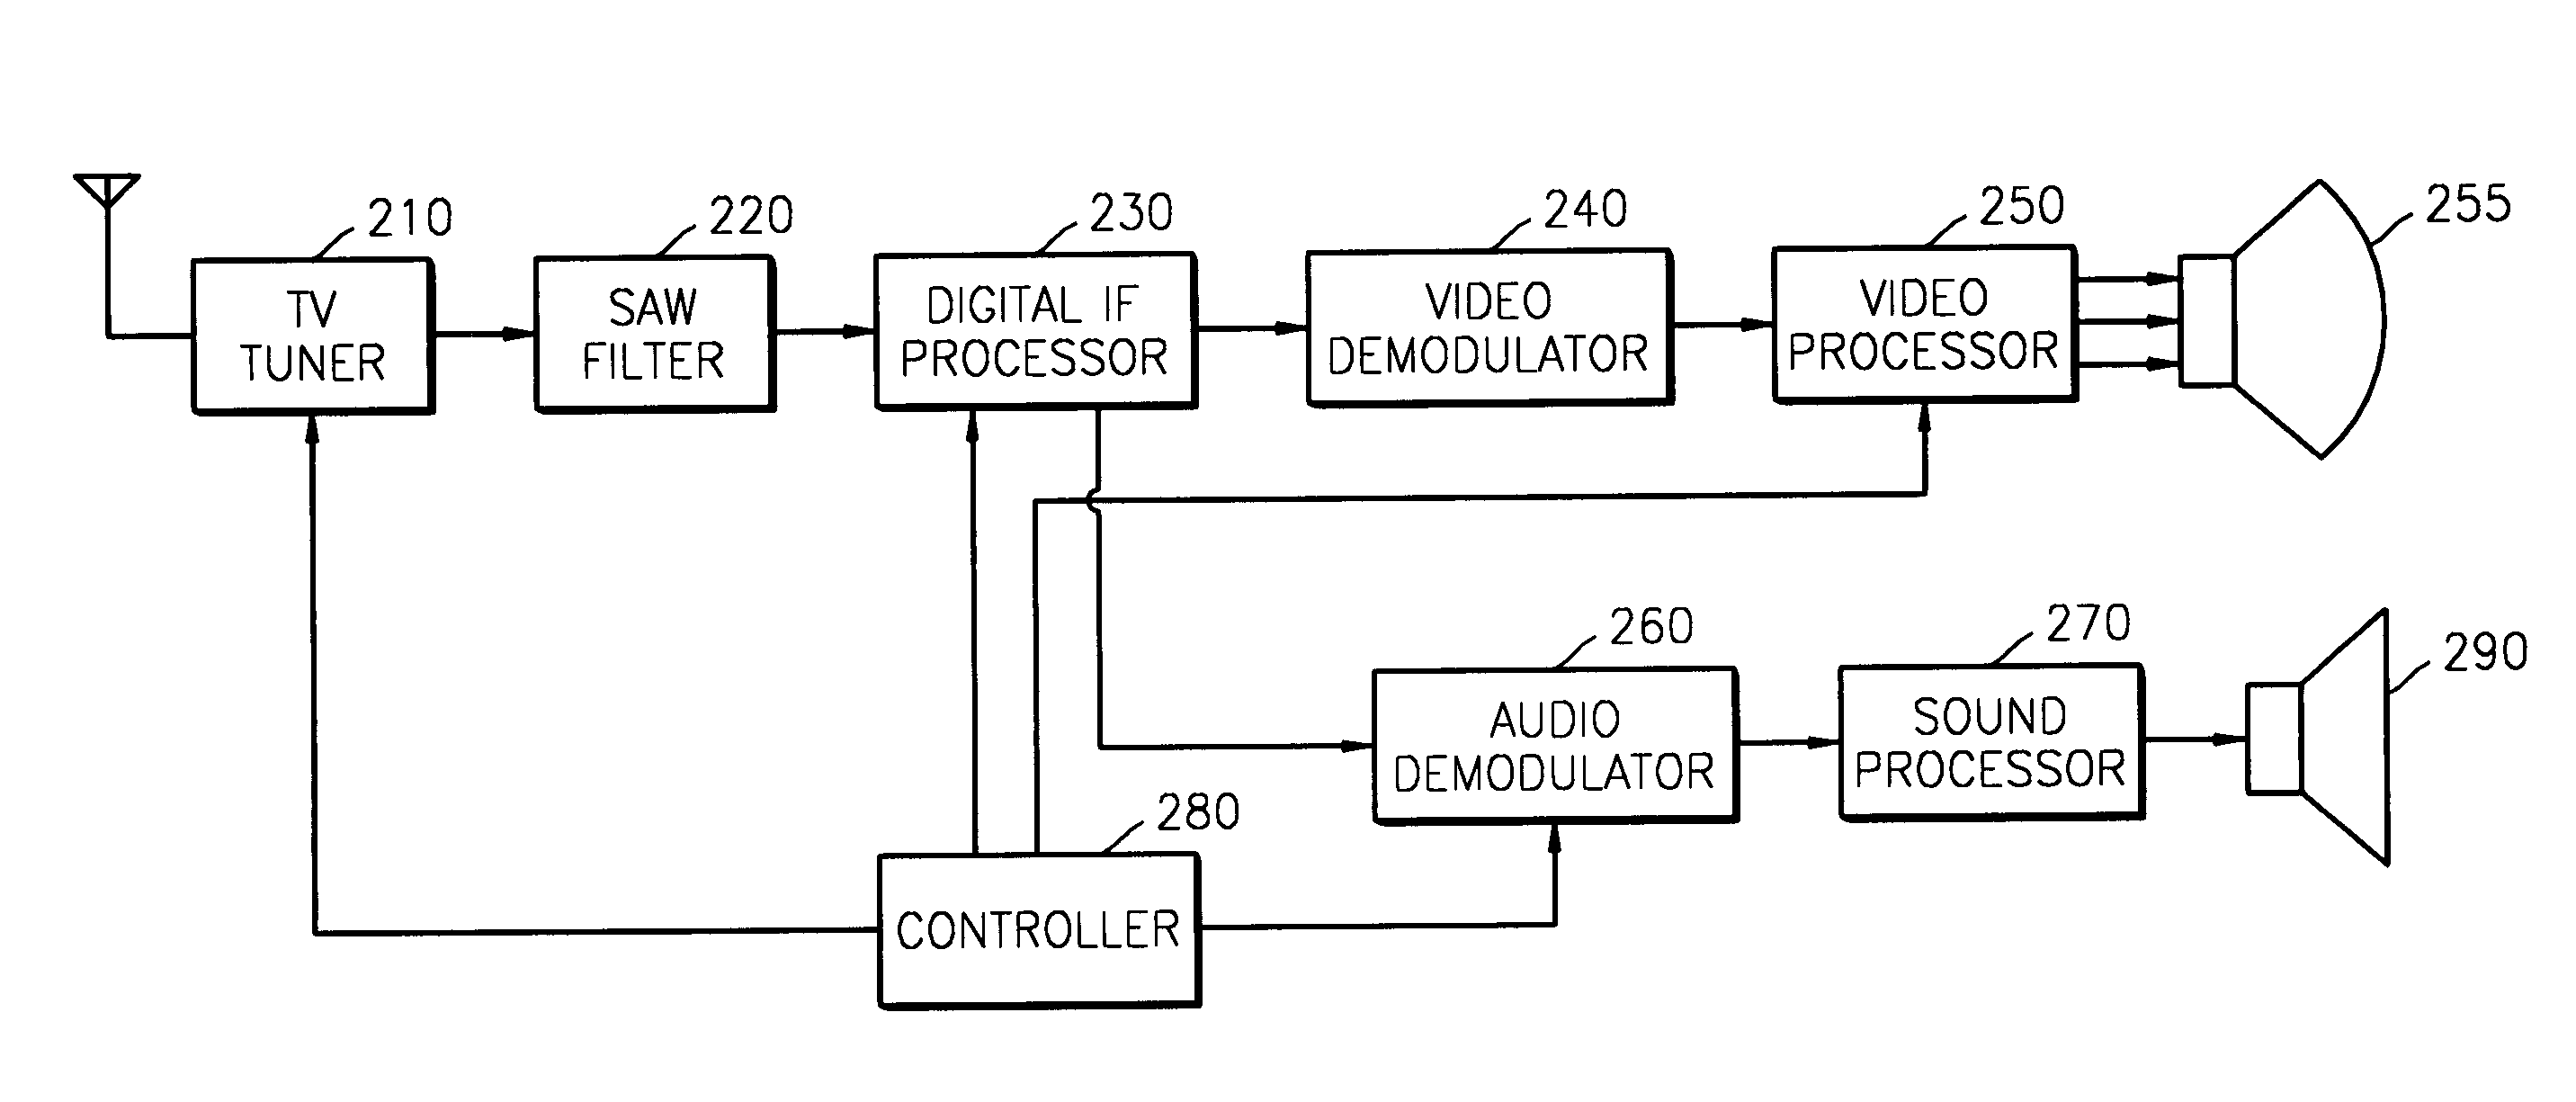 Apparatus and method for receiving television and radio broadcasting signals using a single tuner